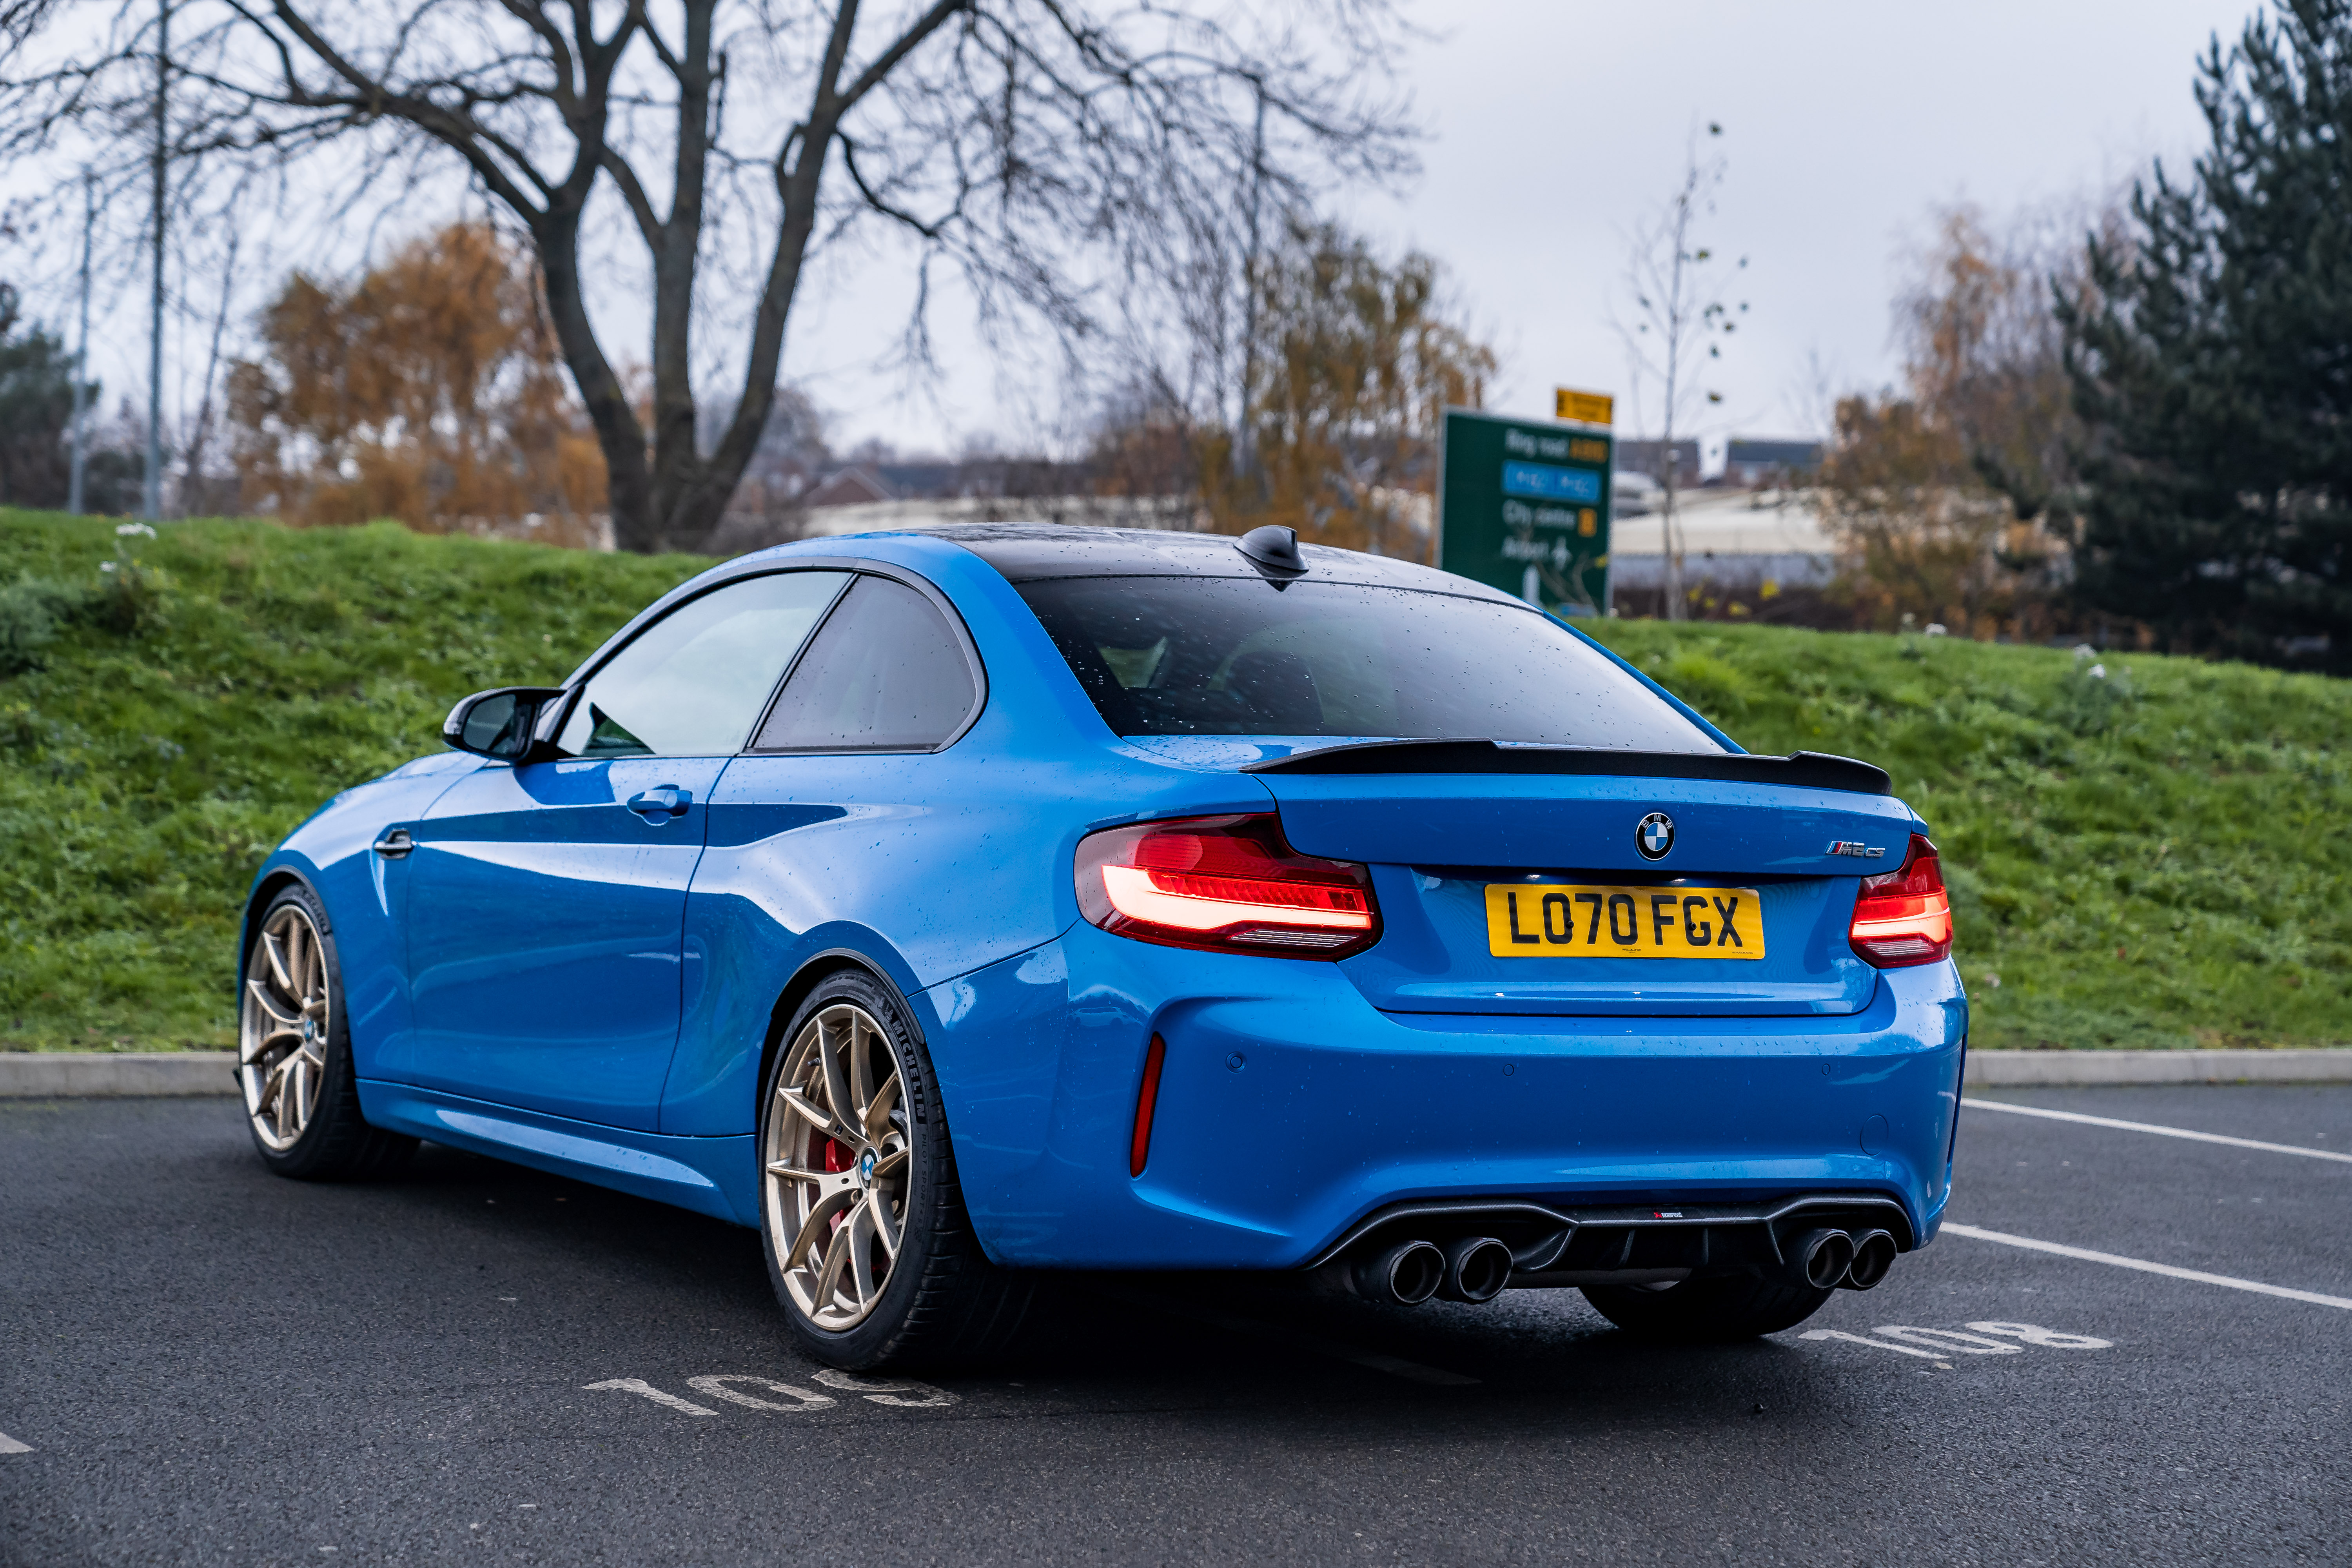 2021 BMW M2 CS for sale by auction in Ossett, West Yorkshire, United Kingdom photo pic